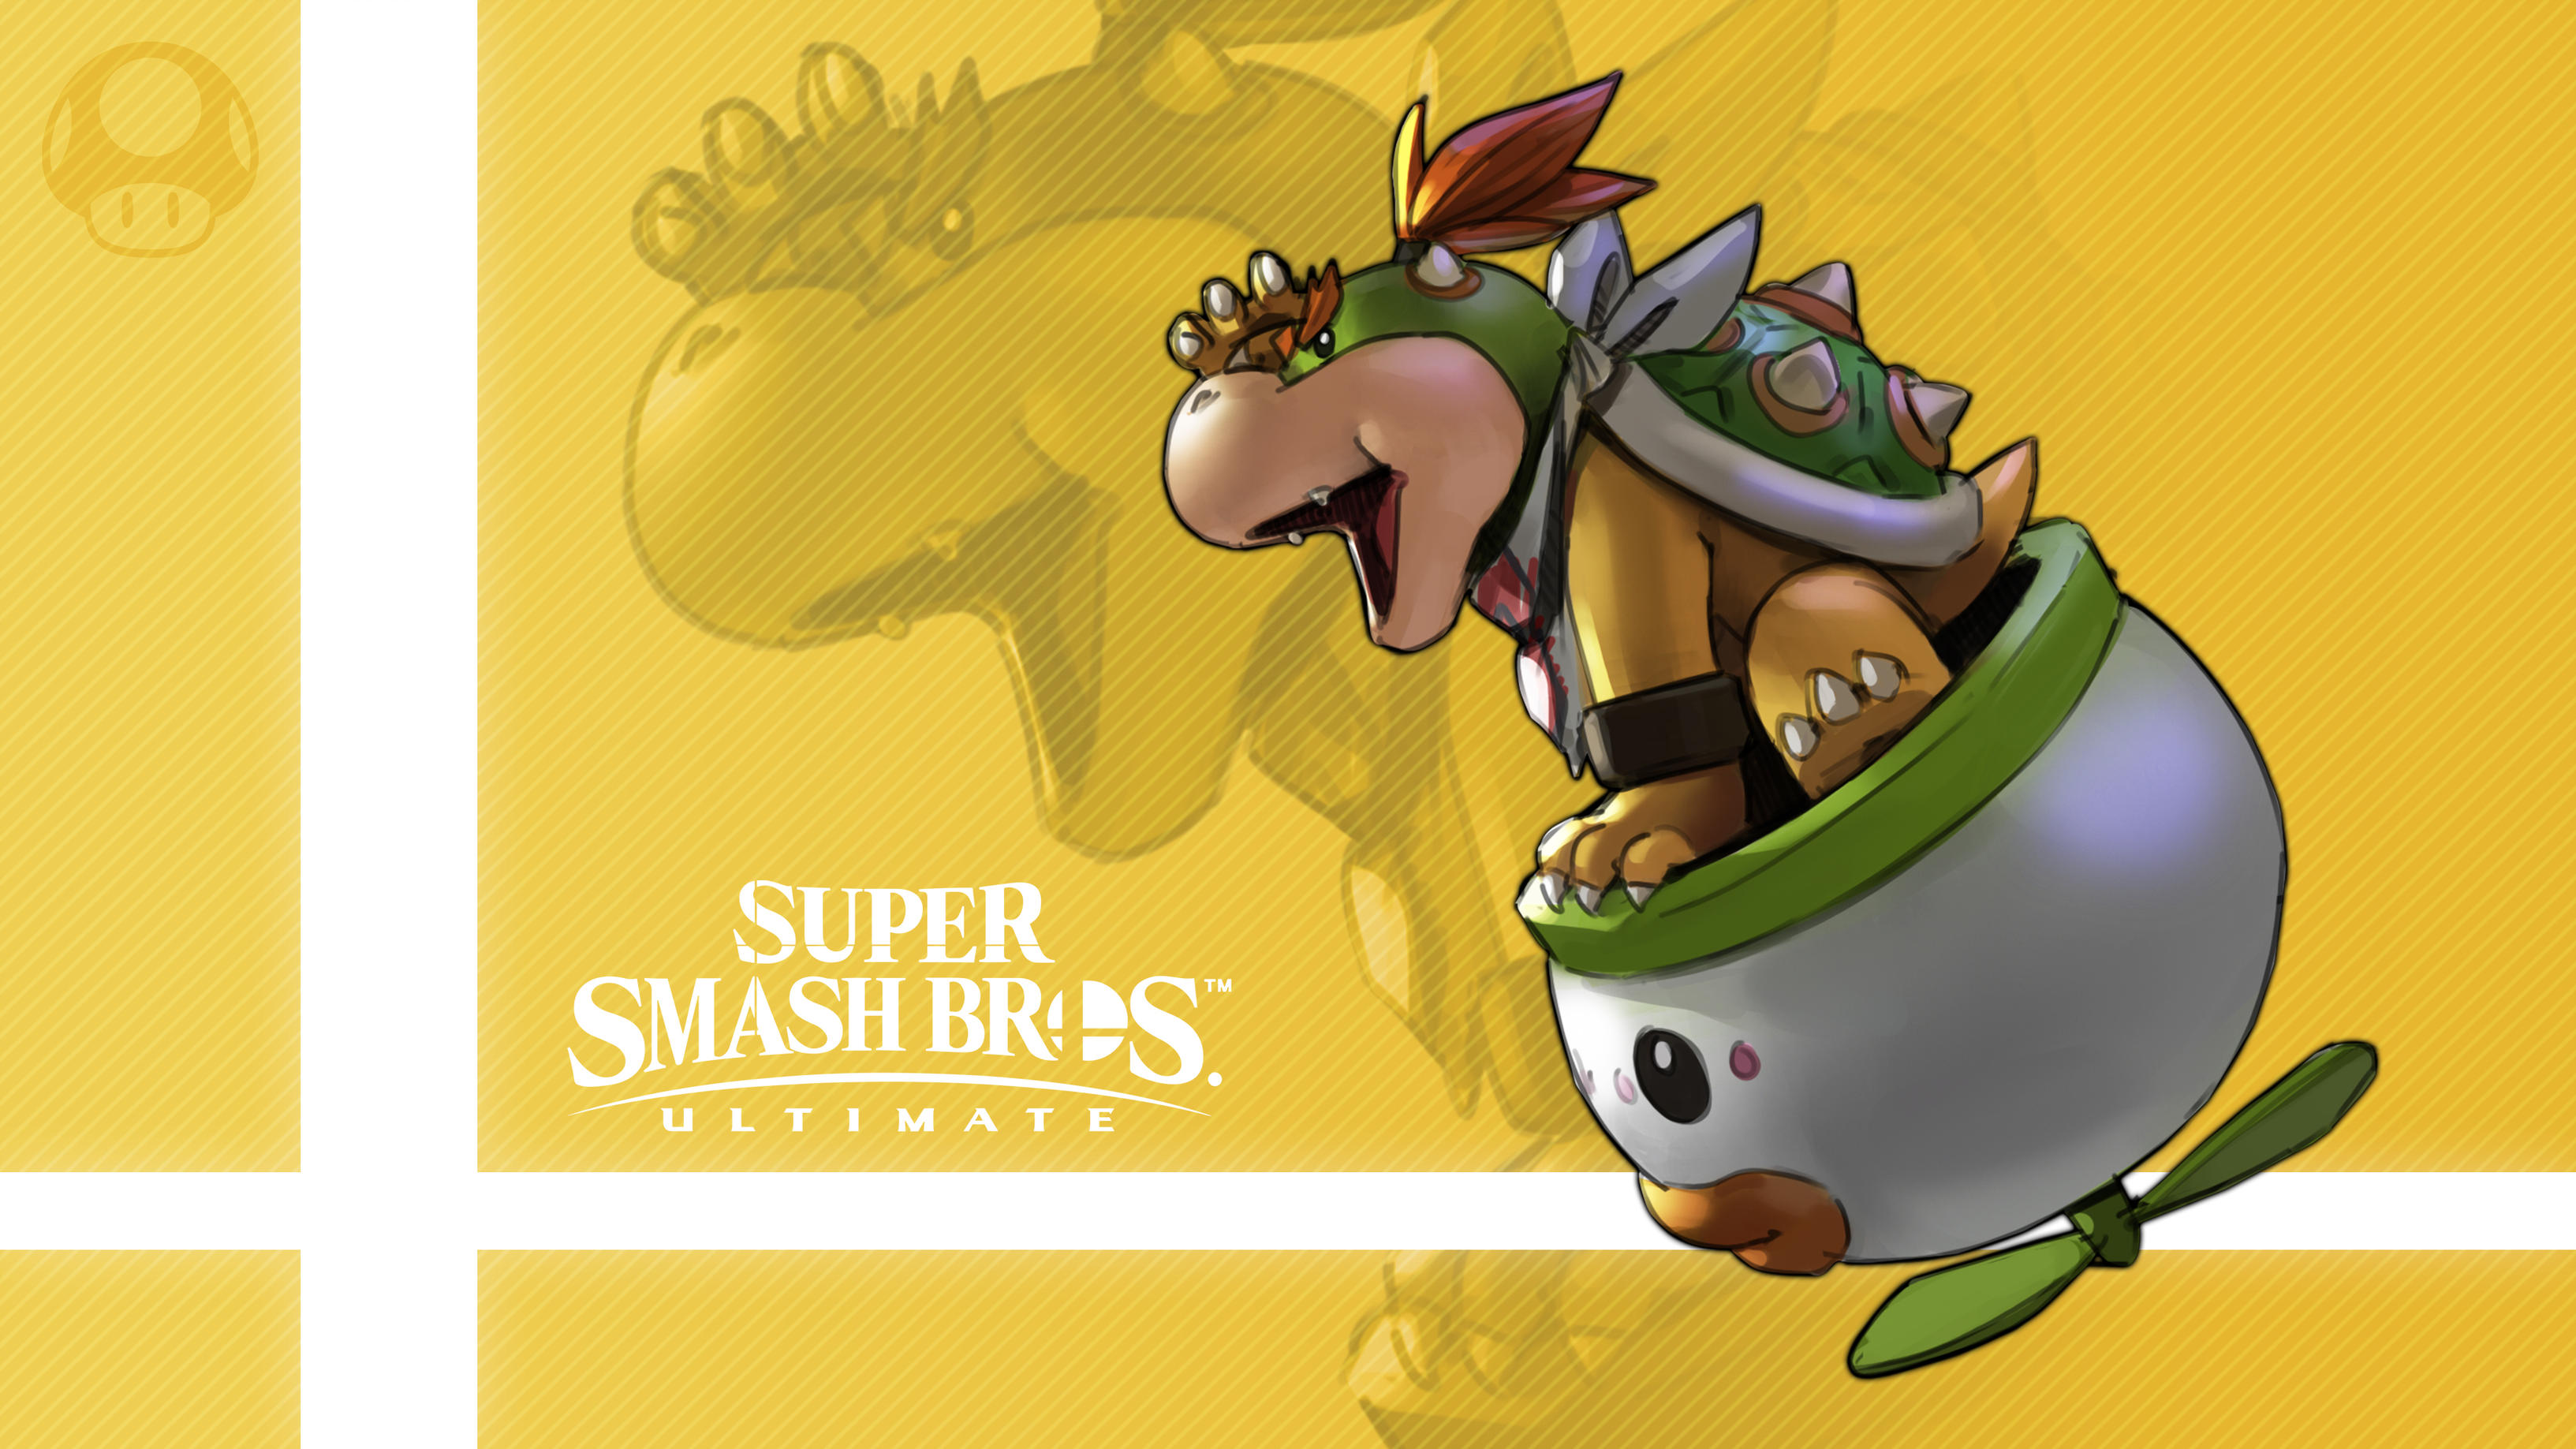 Download Bowser Jr wallpapers for mobile phone free Bowser Jr HD  pictures